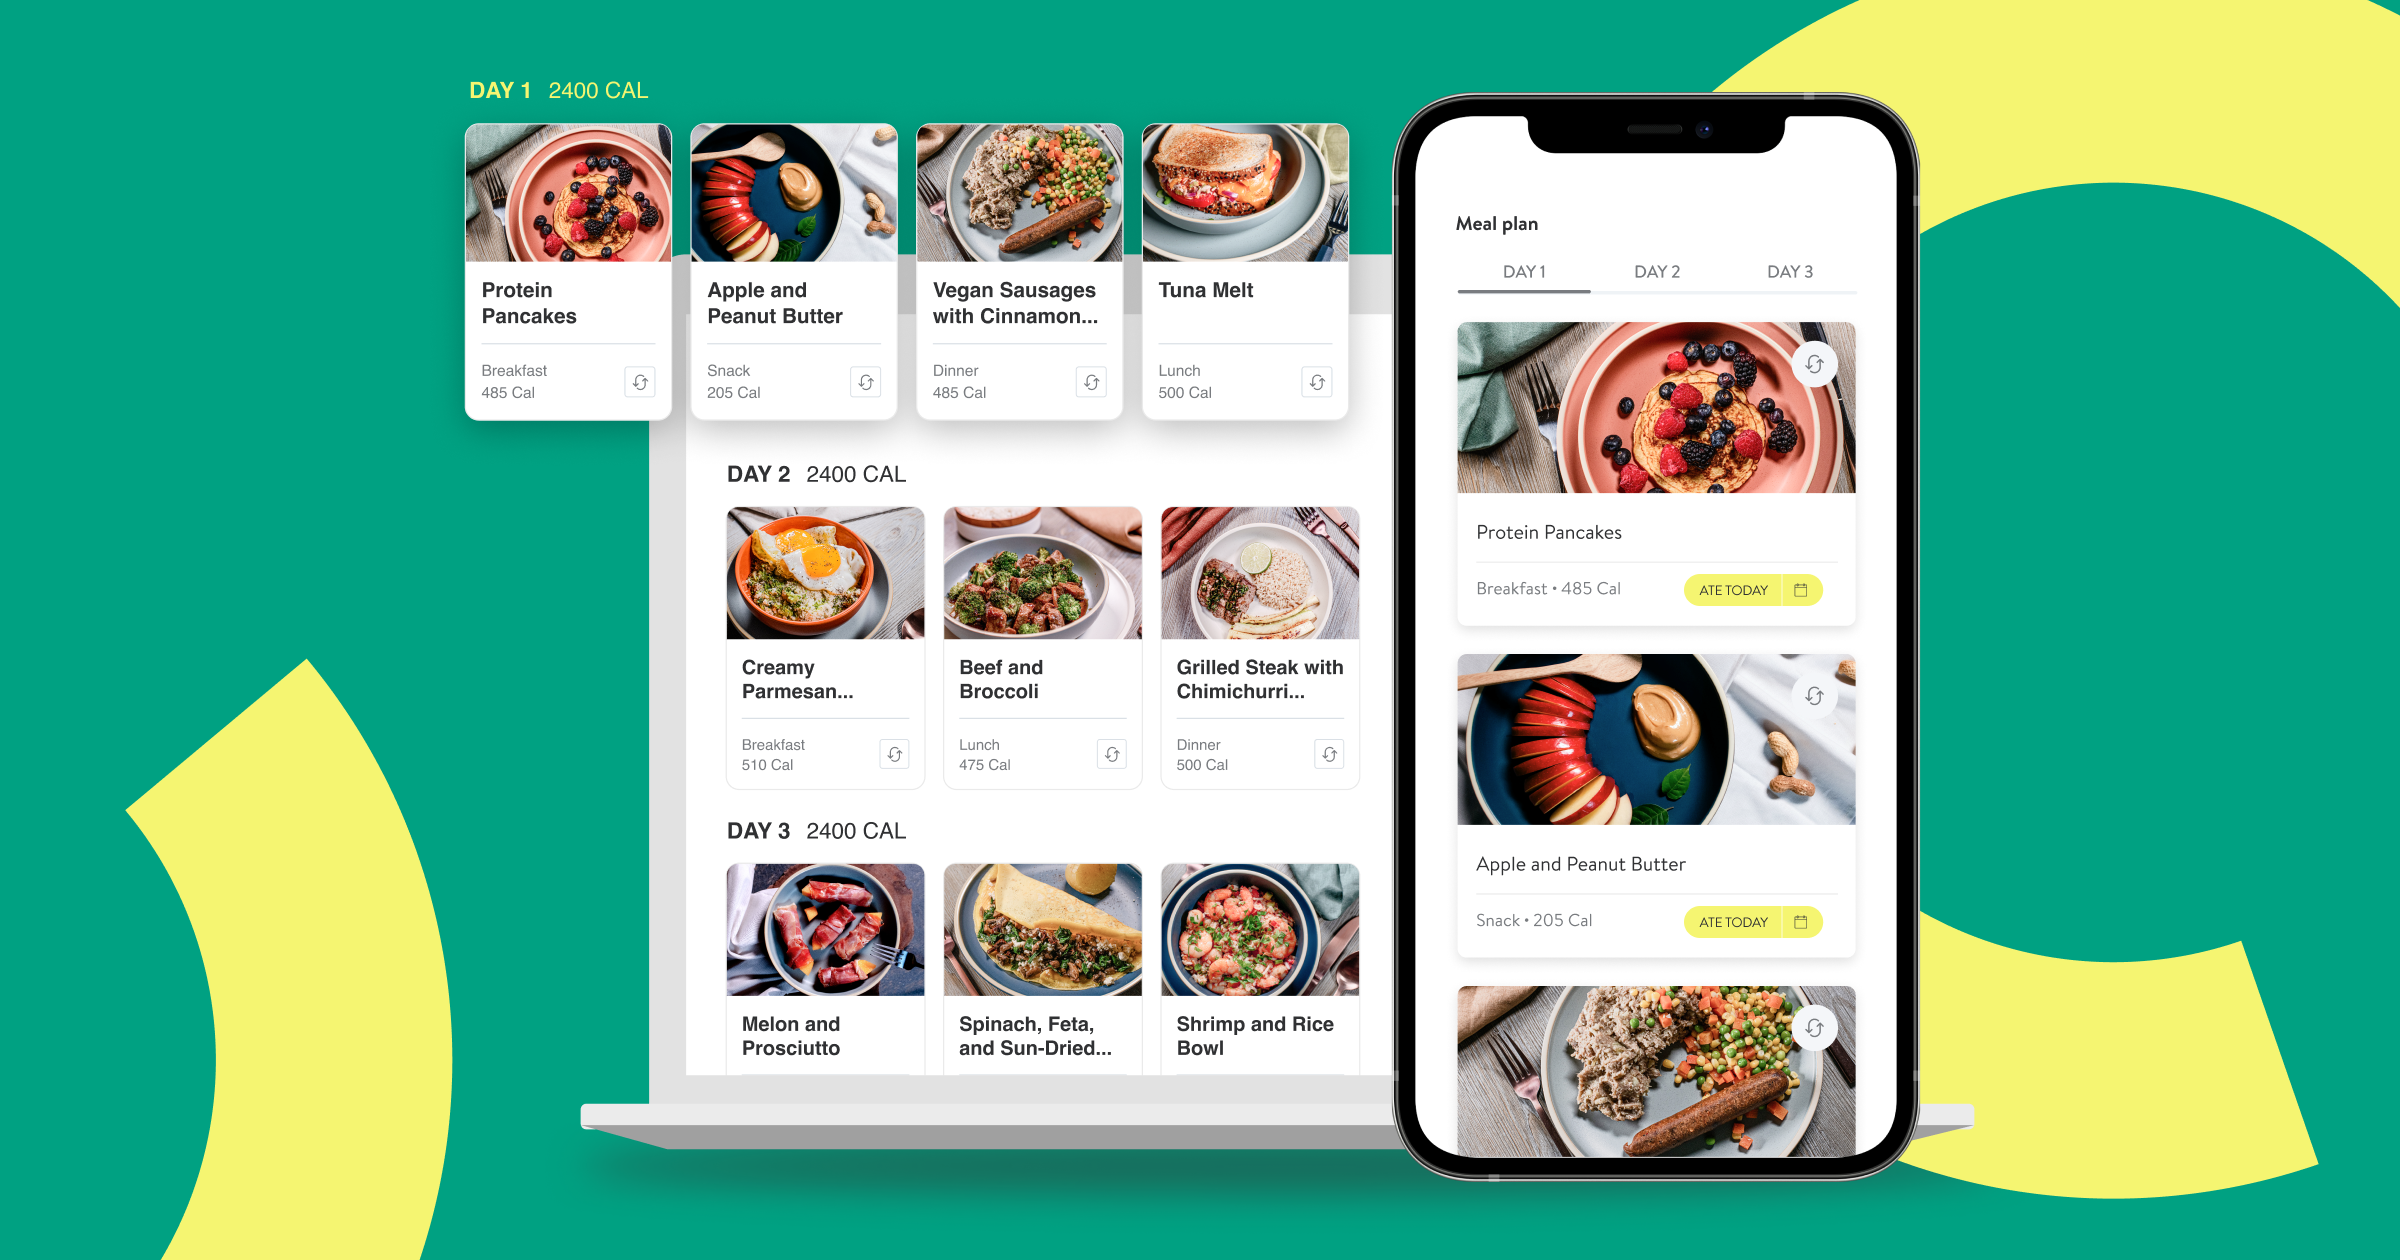 Introducing the Smart Meal Planner - The easiest, fastest (and most fun) way to offer meal plan suggestions for clients